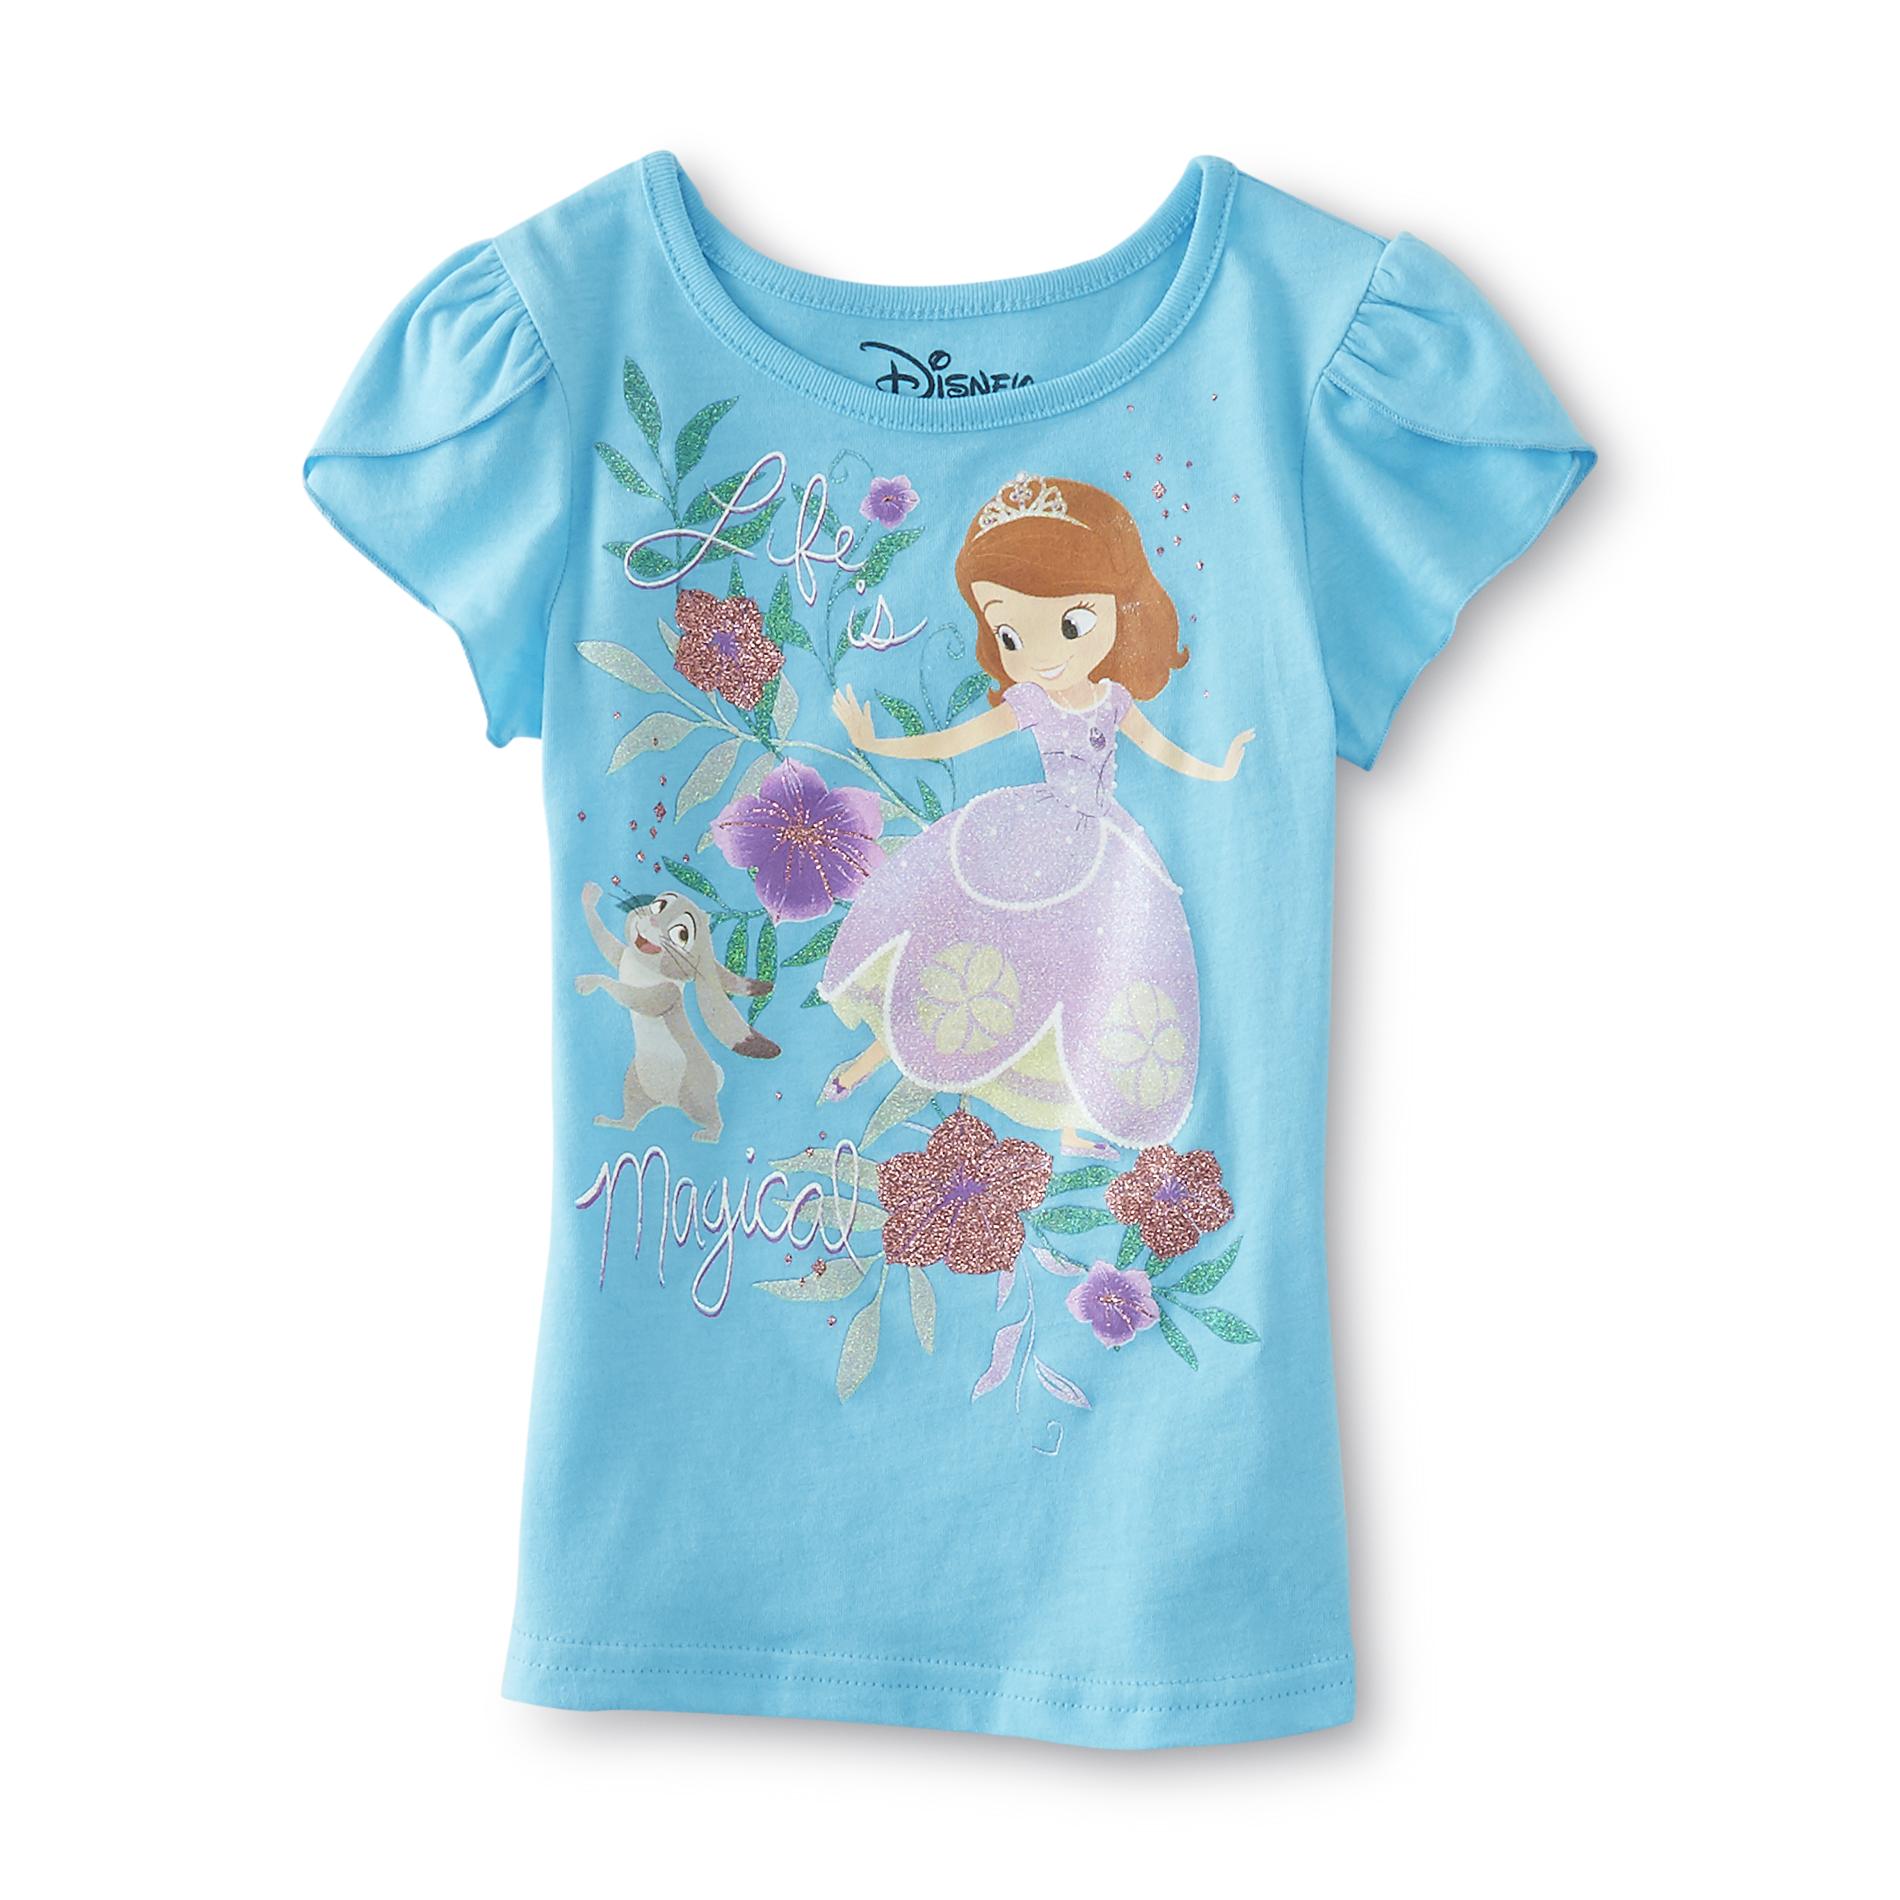 Disney Sofia the First Toddler Girl's T-Shirt